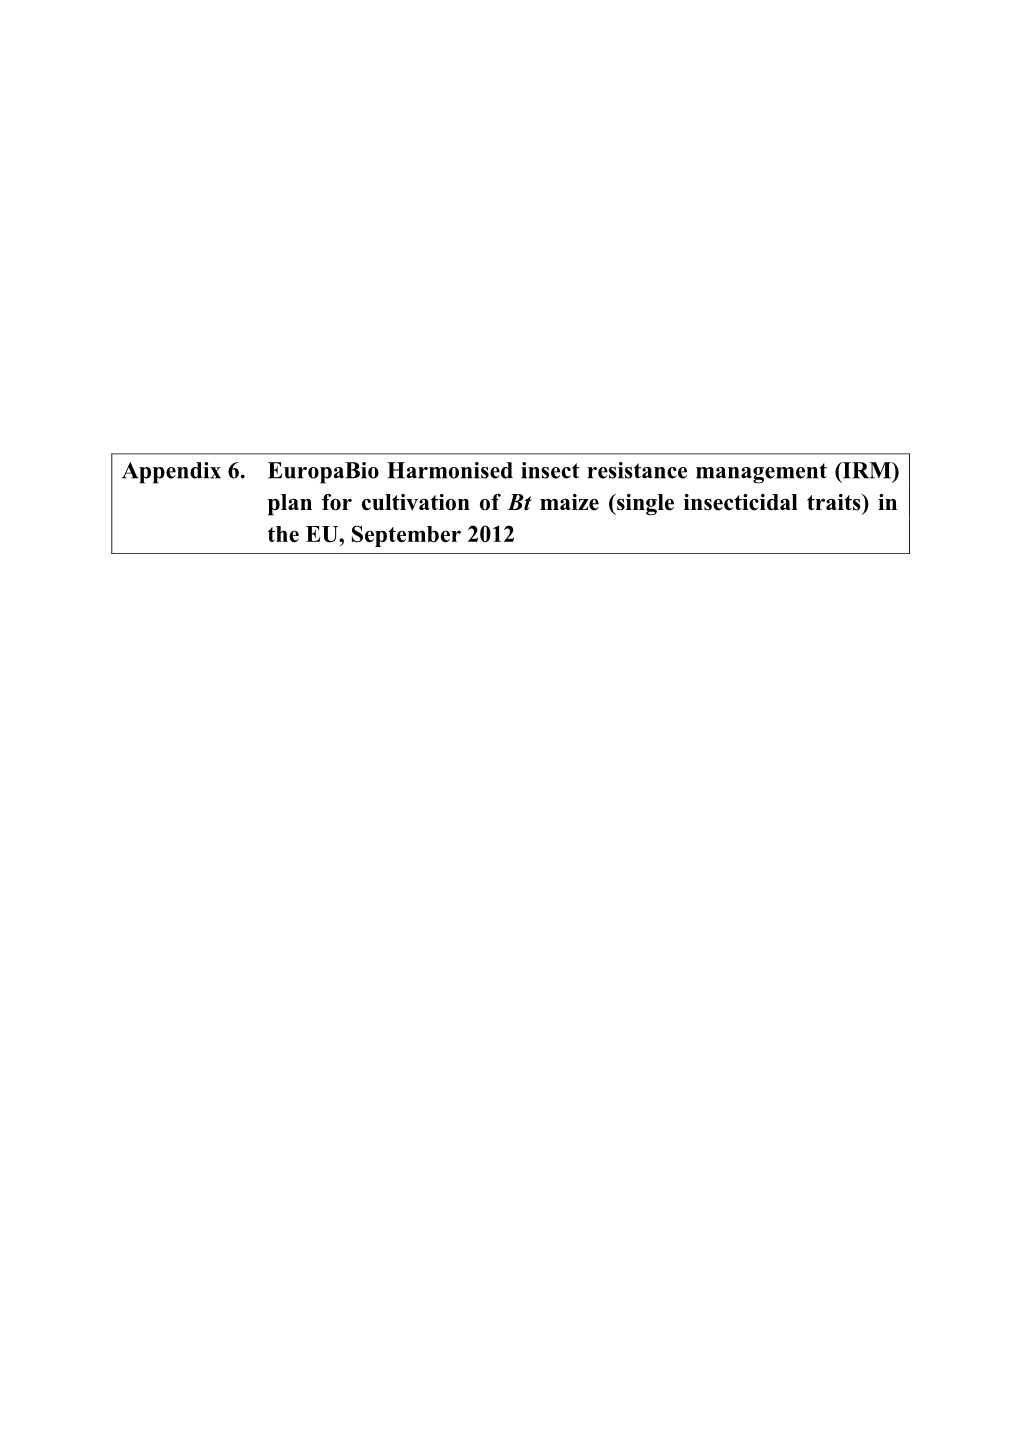 Appendix 6. Europabio Harmonised Insect Resistance Management (IRM) Plan for Cultivation of Bt Maize (Single Insecticidal Traits) in the EU, September 2012